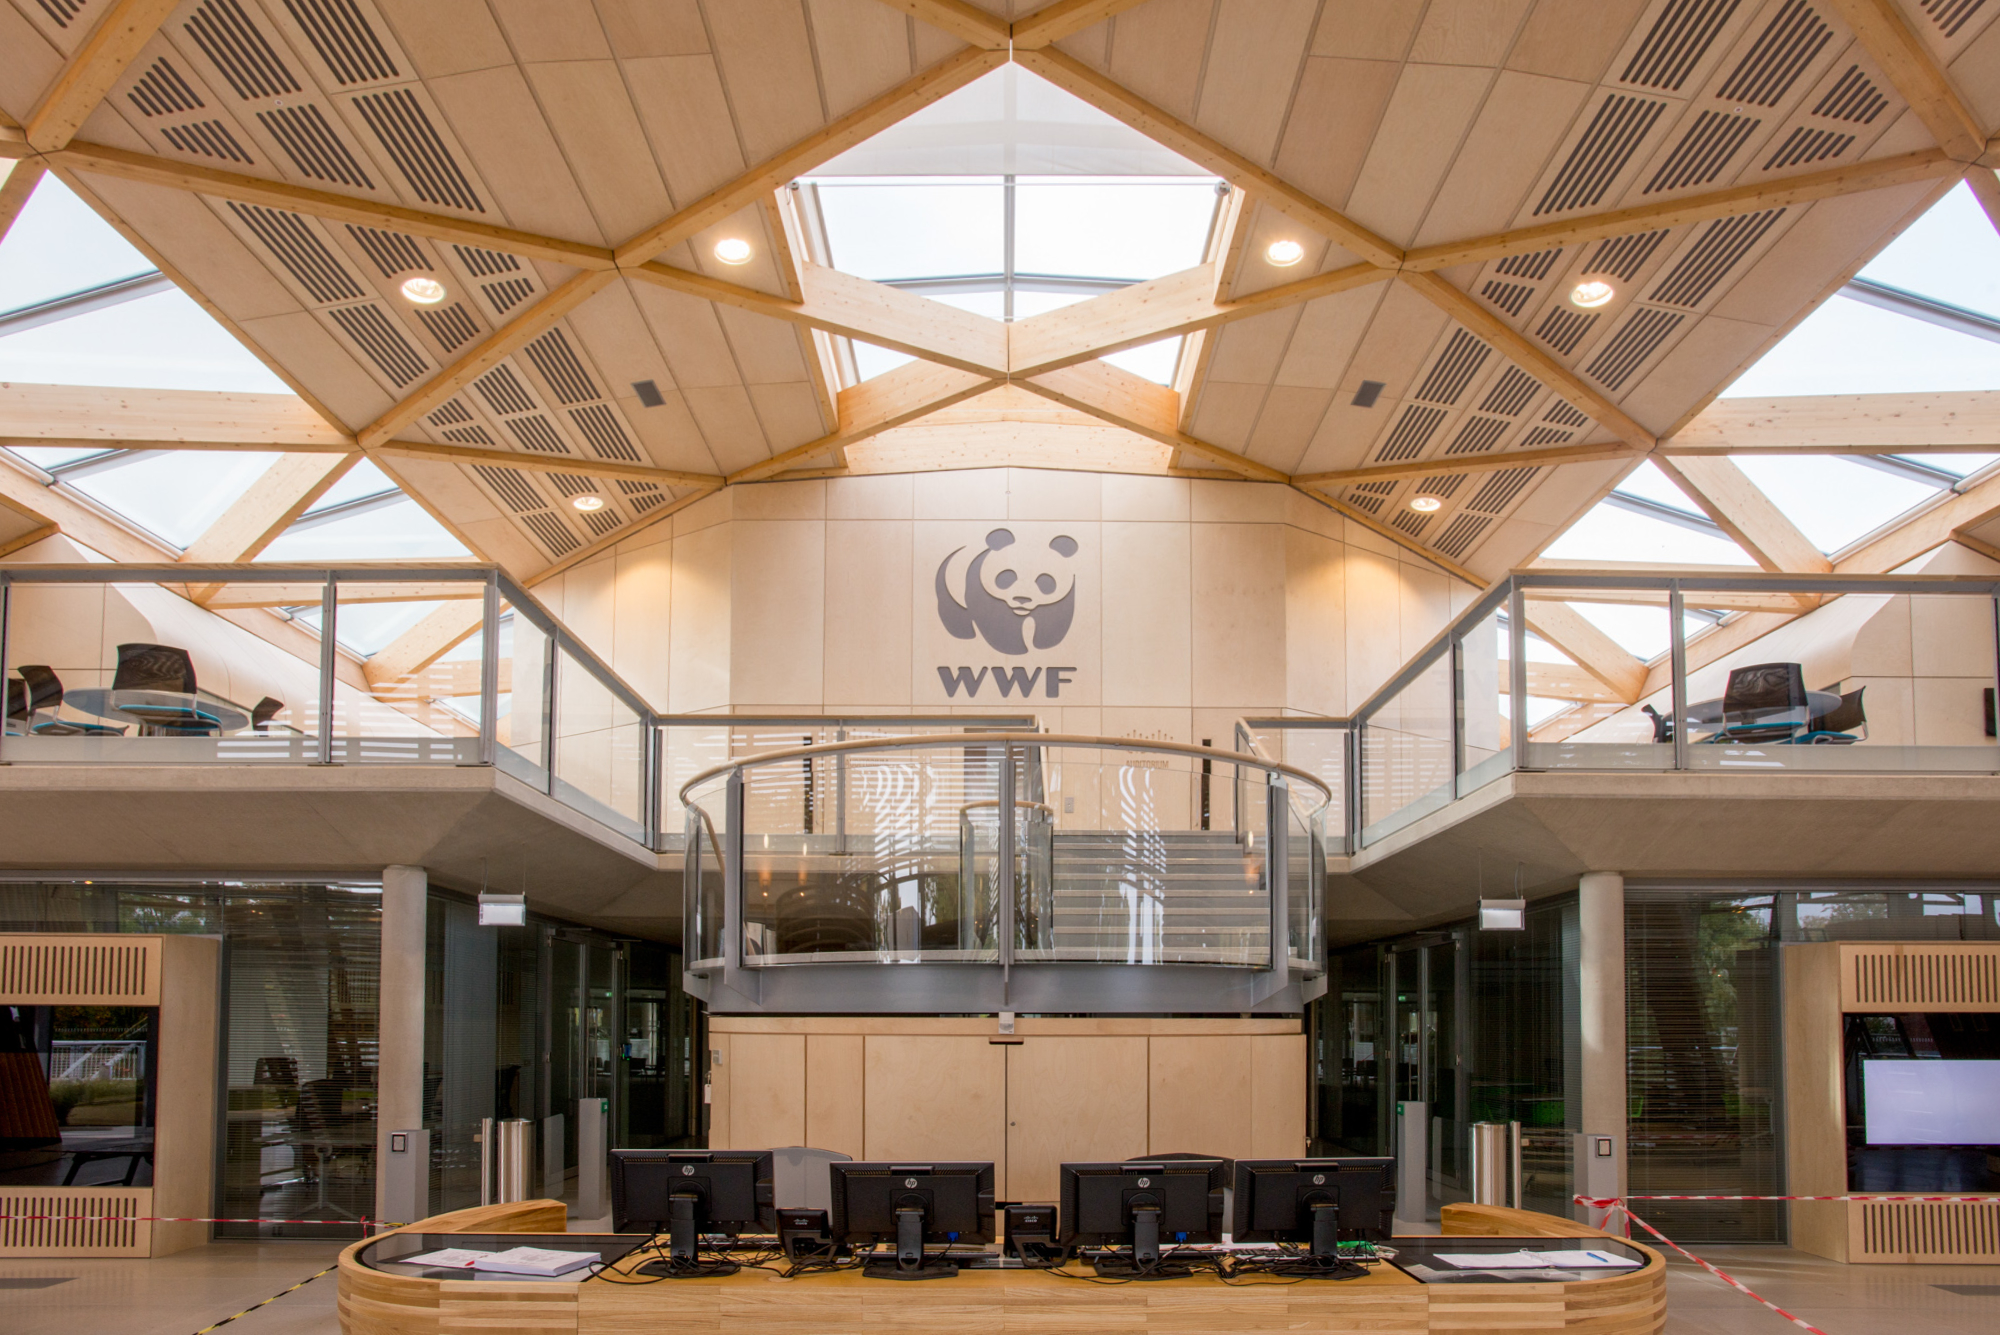 The new UK headquarters building of WWF-UK, the Living Planet Ce